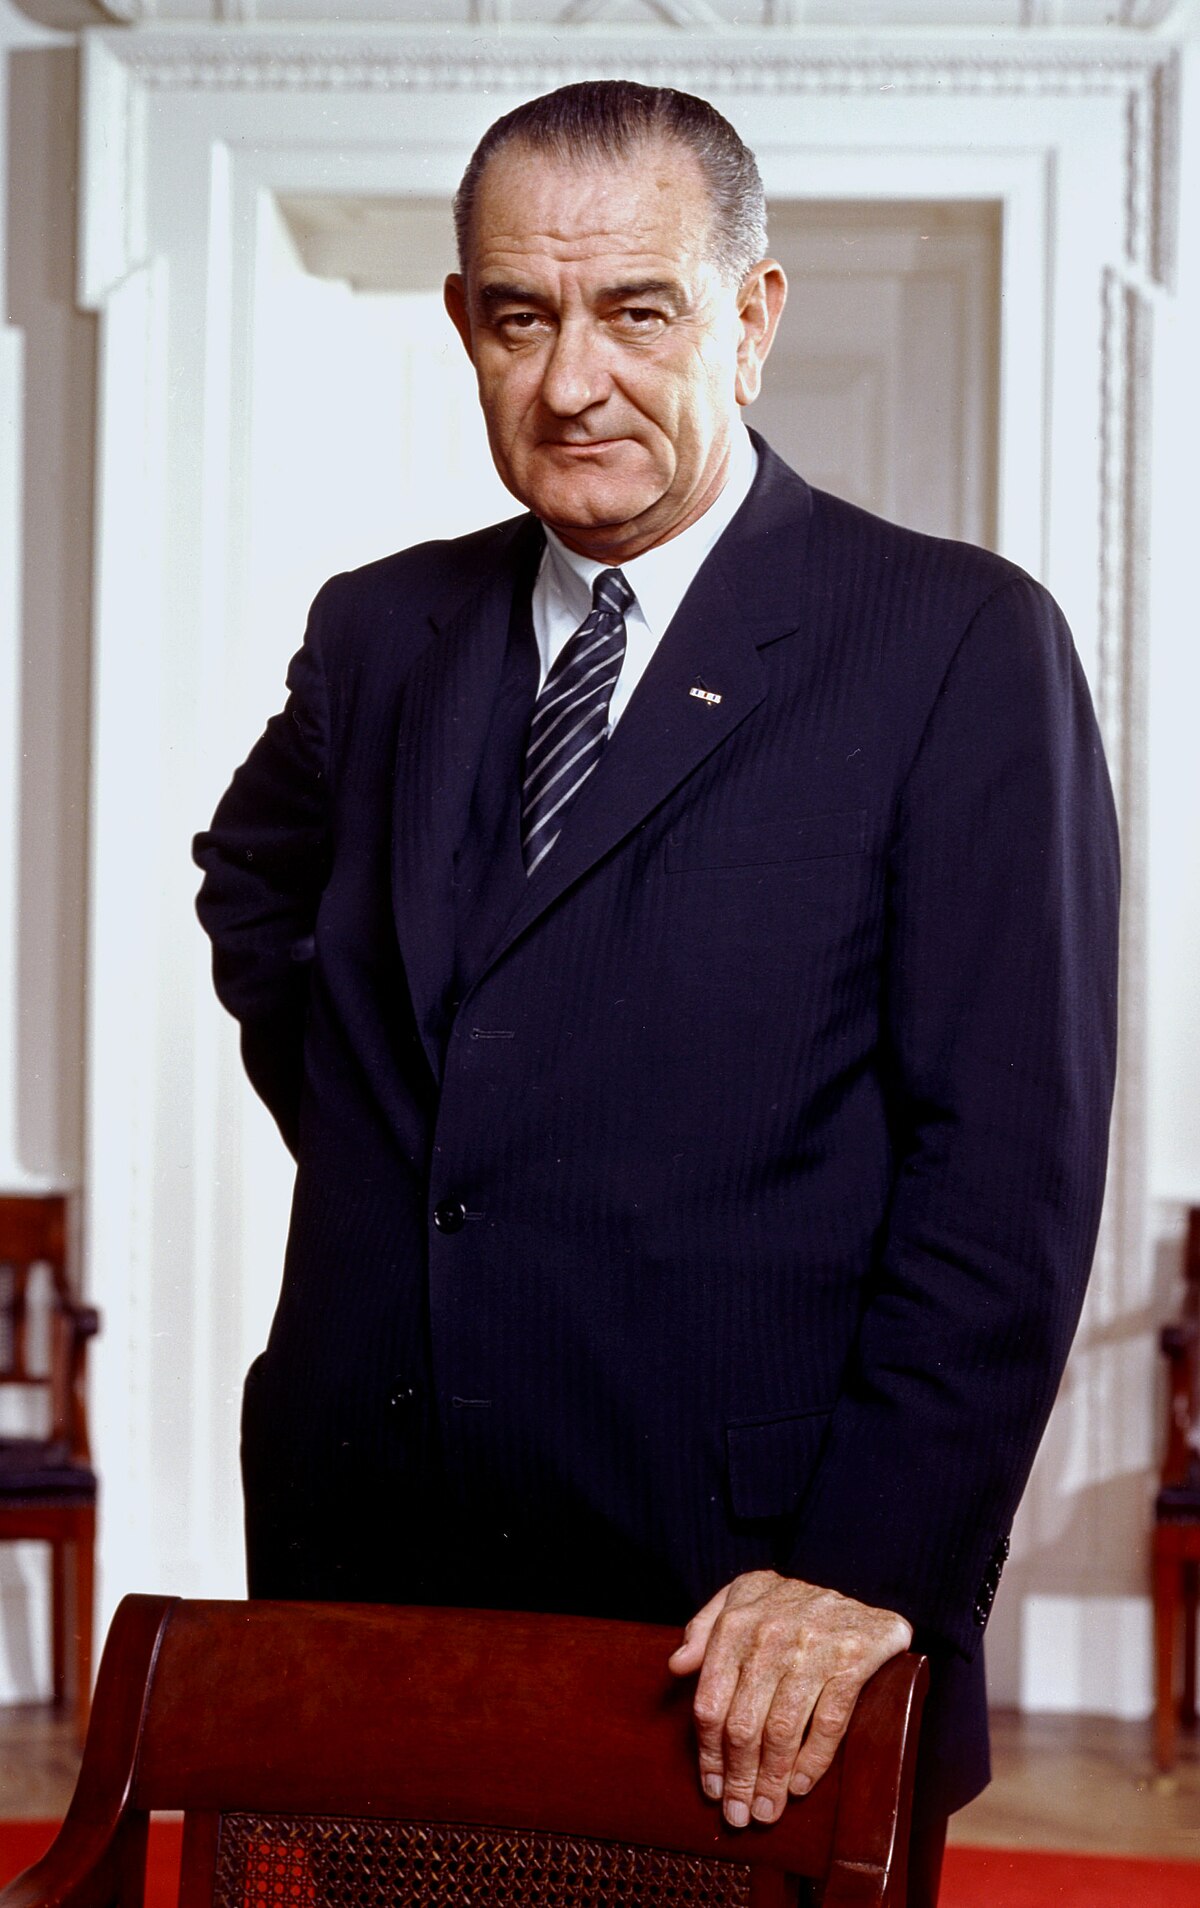 lyndon_b_johnson_photo_portrait_leaning_on_chair_color_cropped.jpg